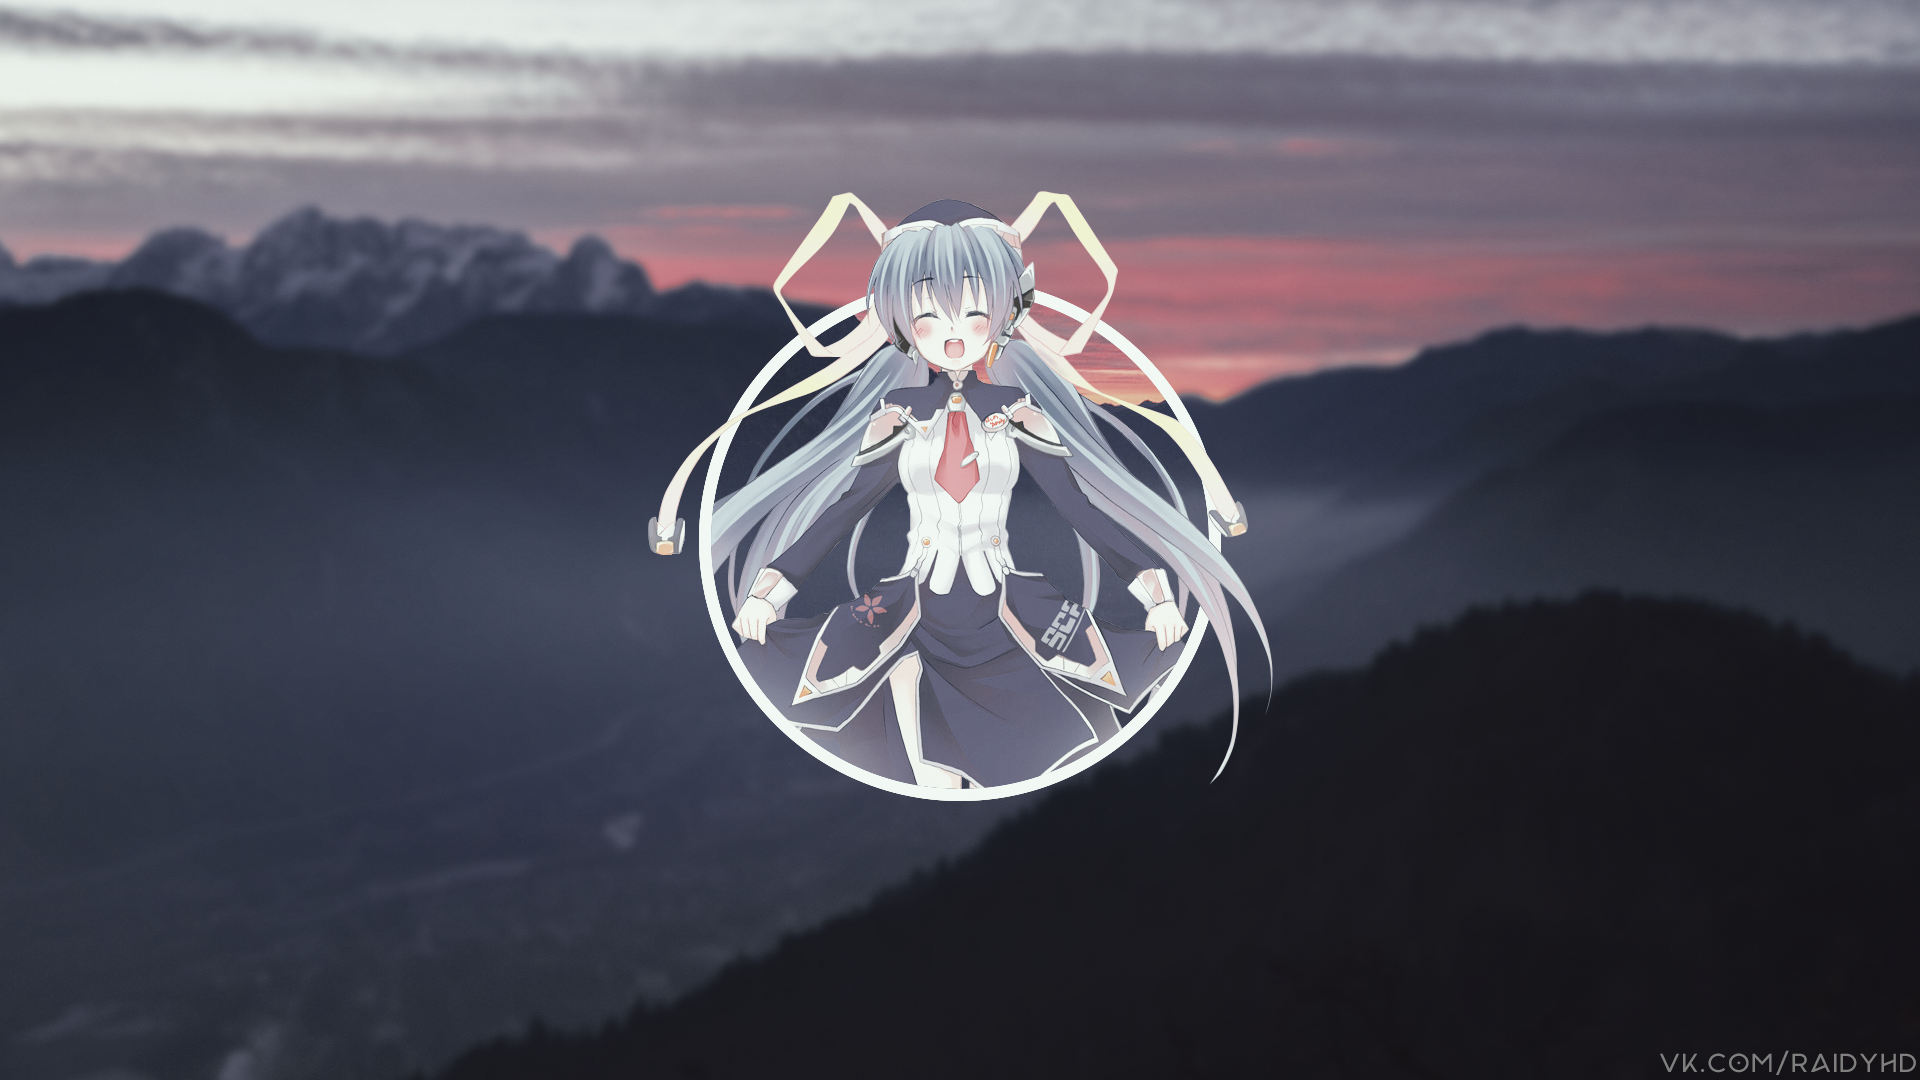 Anime 1920x1080 anime anime girls Planetarian: The Reverie of A Little Planet Hoshino Yumemi picture-in-picture watermarked